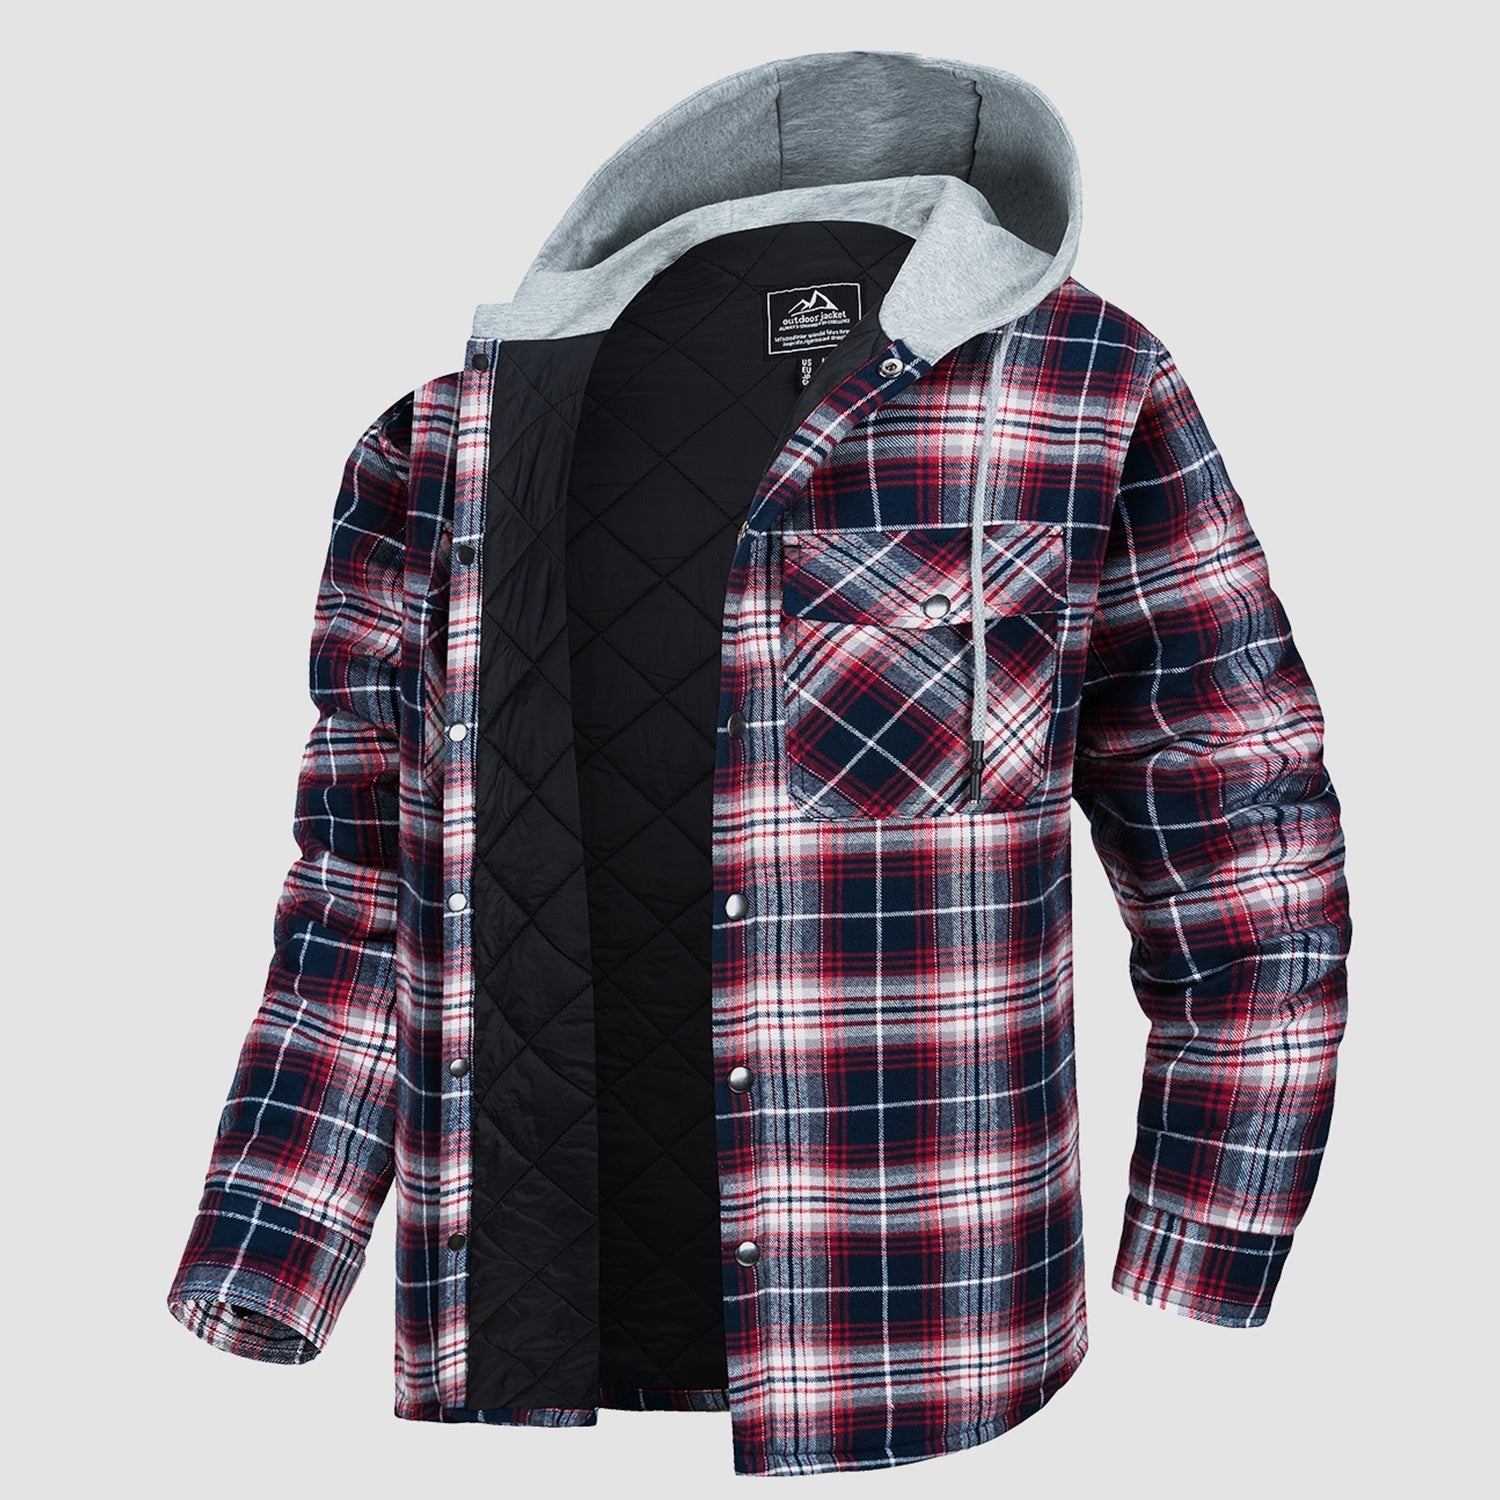 Men's Flannel Shirt Jacket, Long Sleeve Quilted Lined Plaid Coat